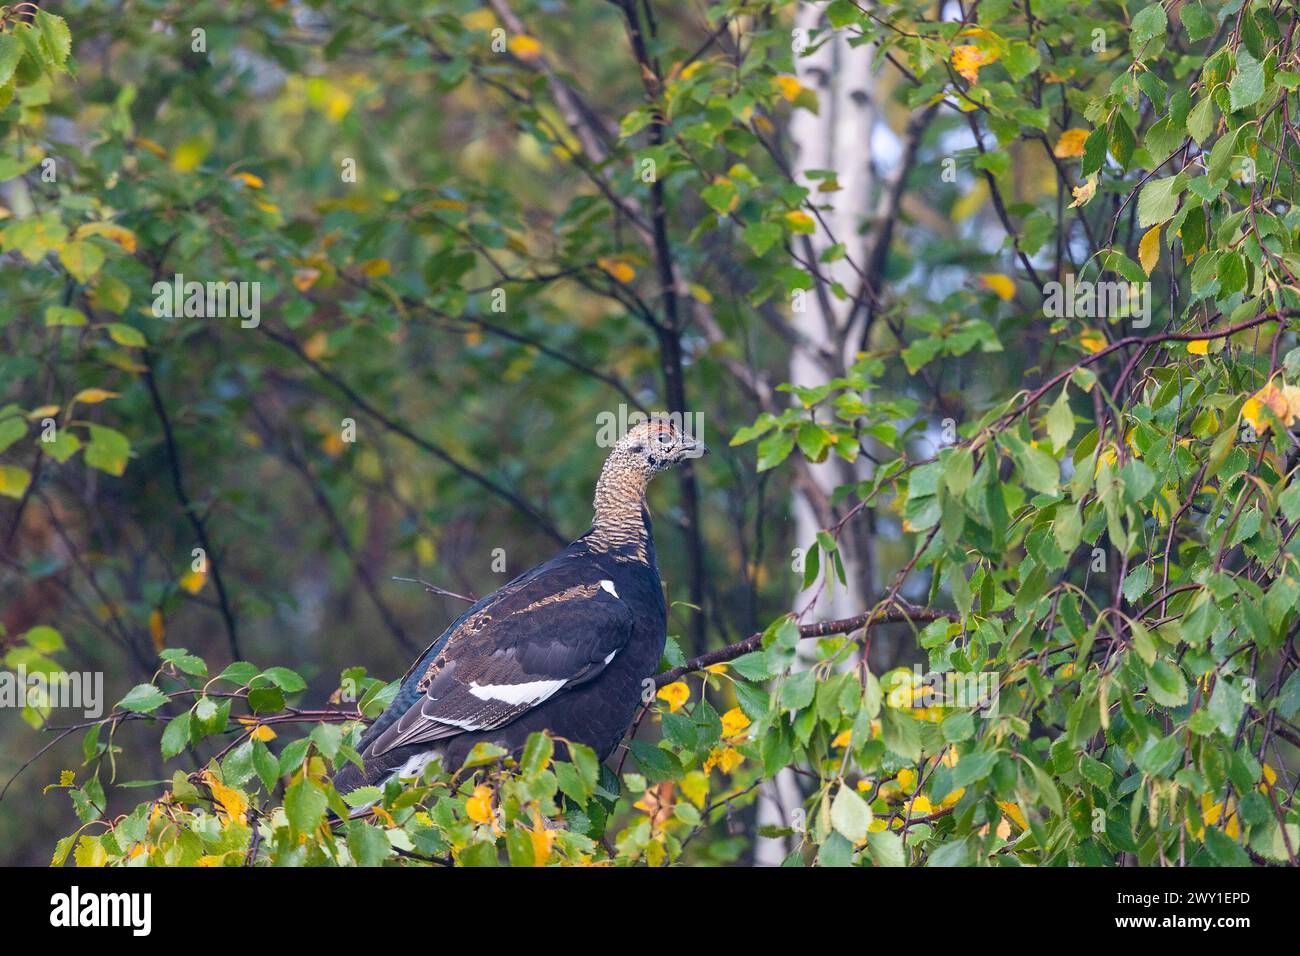 A young black grouse sits on a birch branch Stock Photo